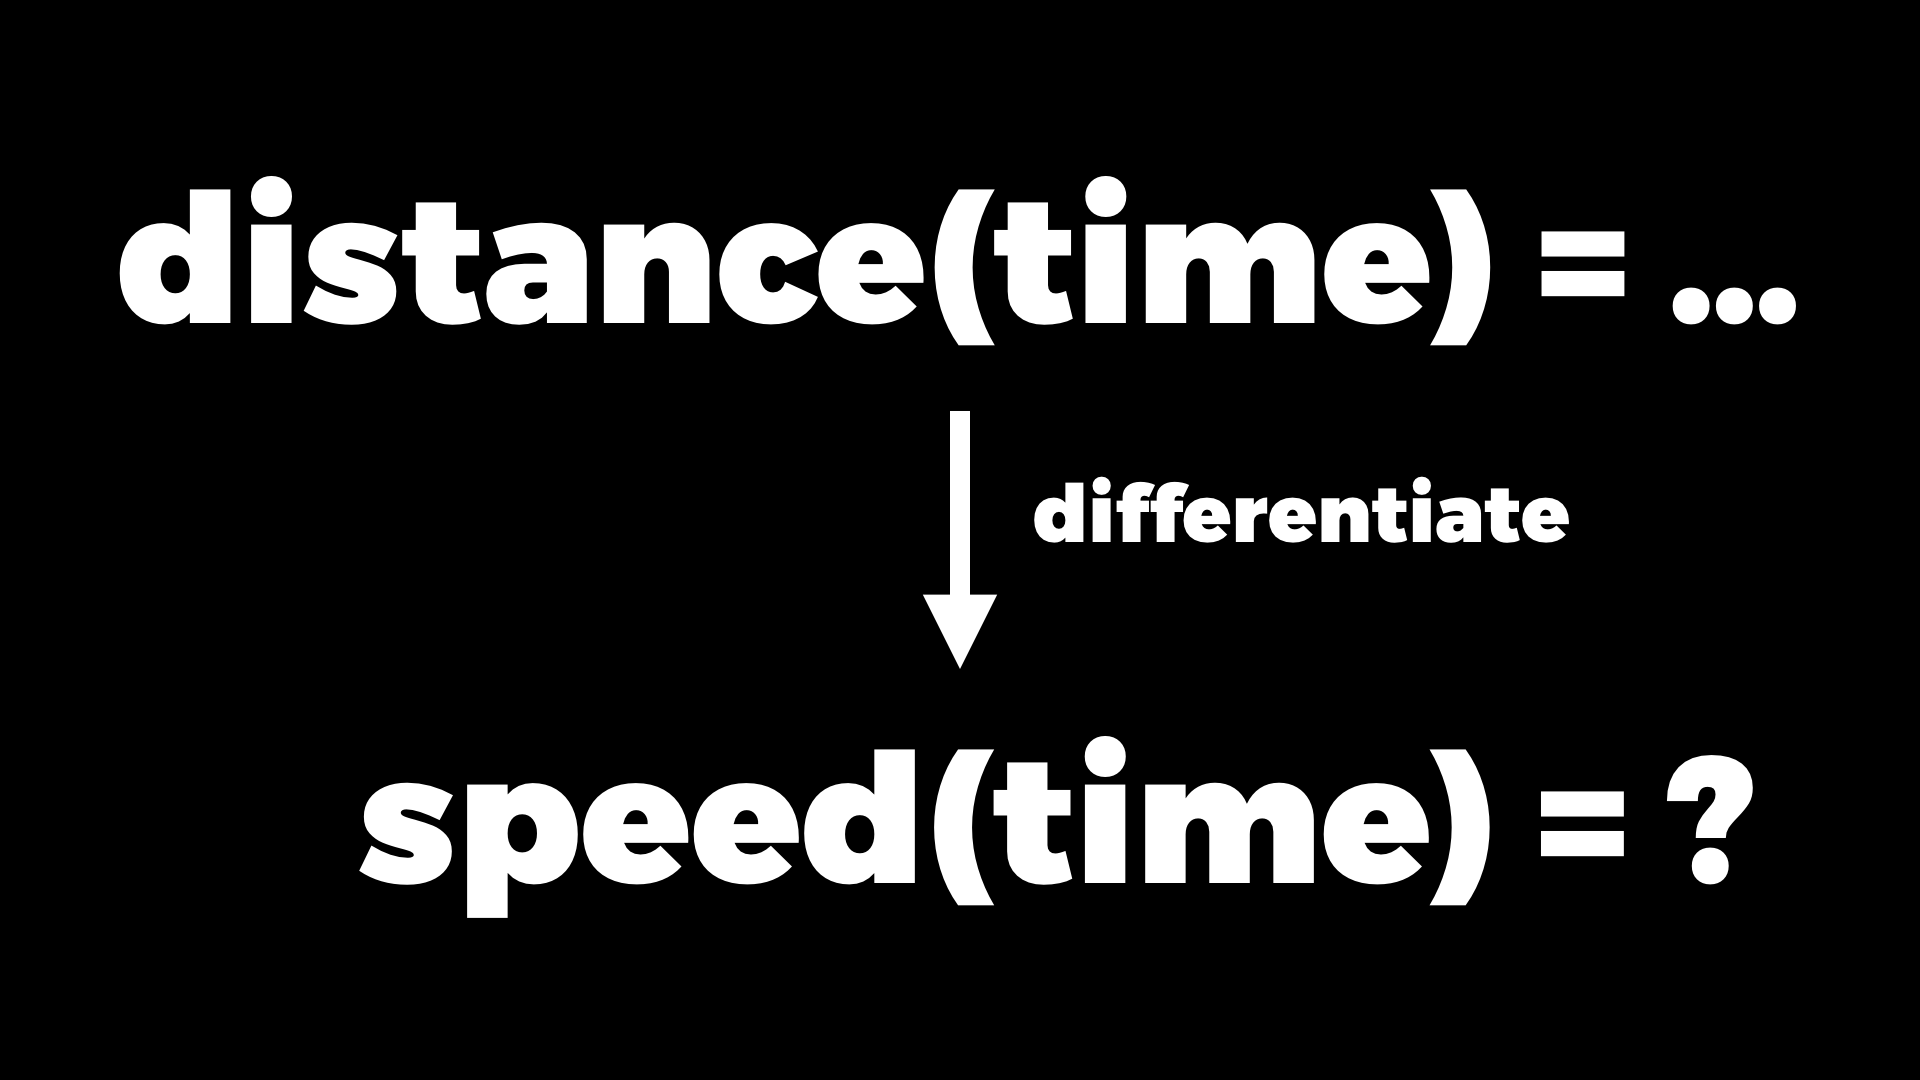 When we differentiate distance(time), we get speed(time)